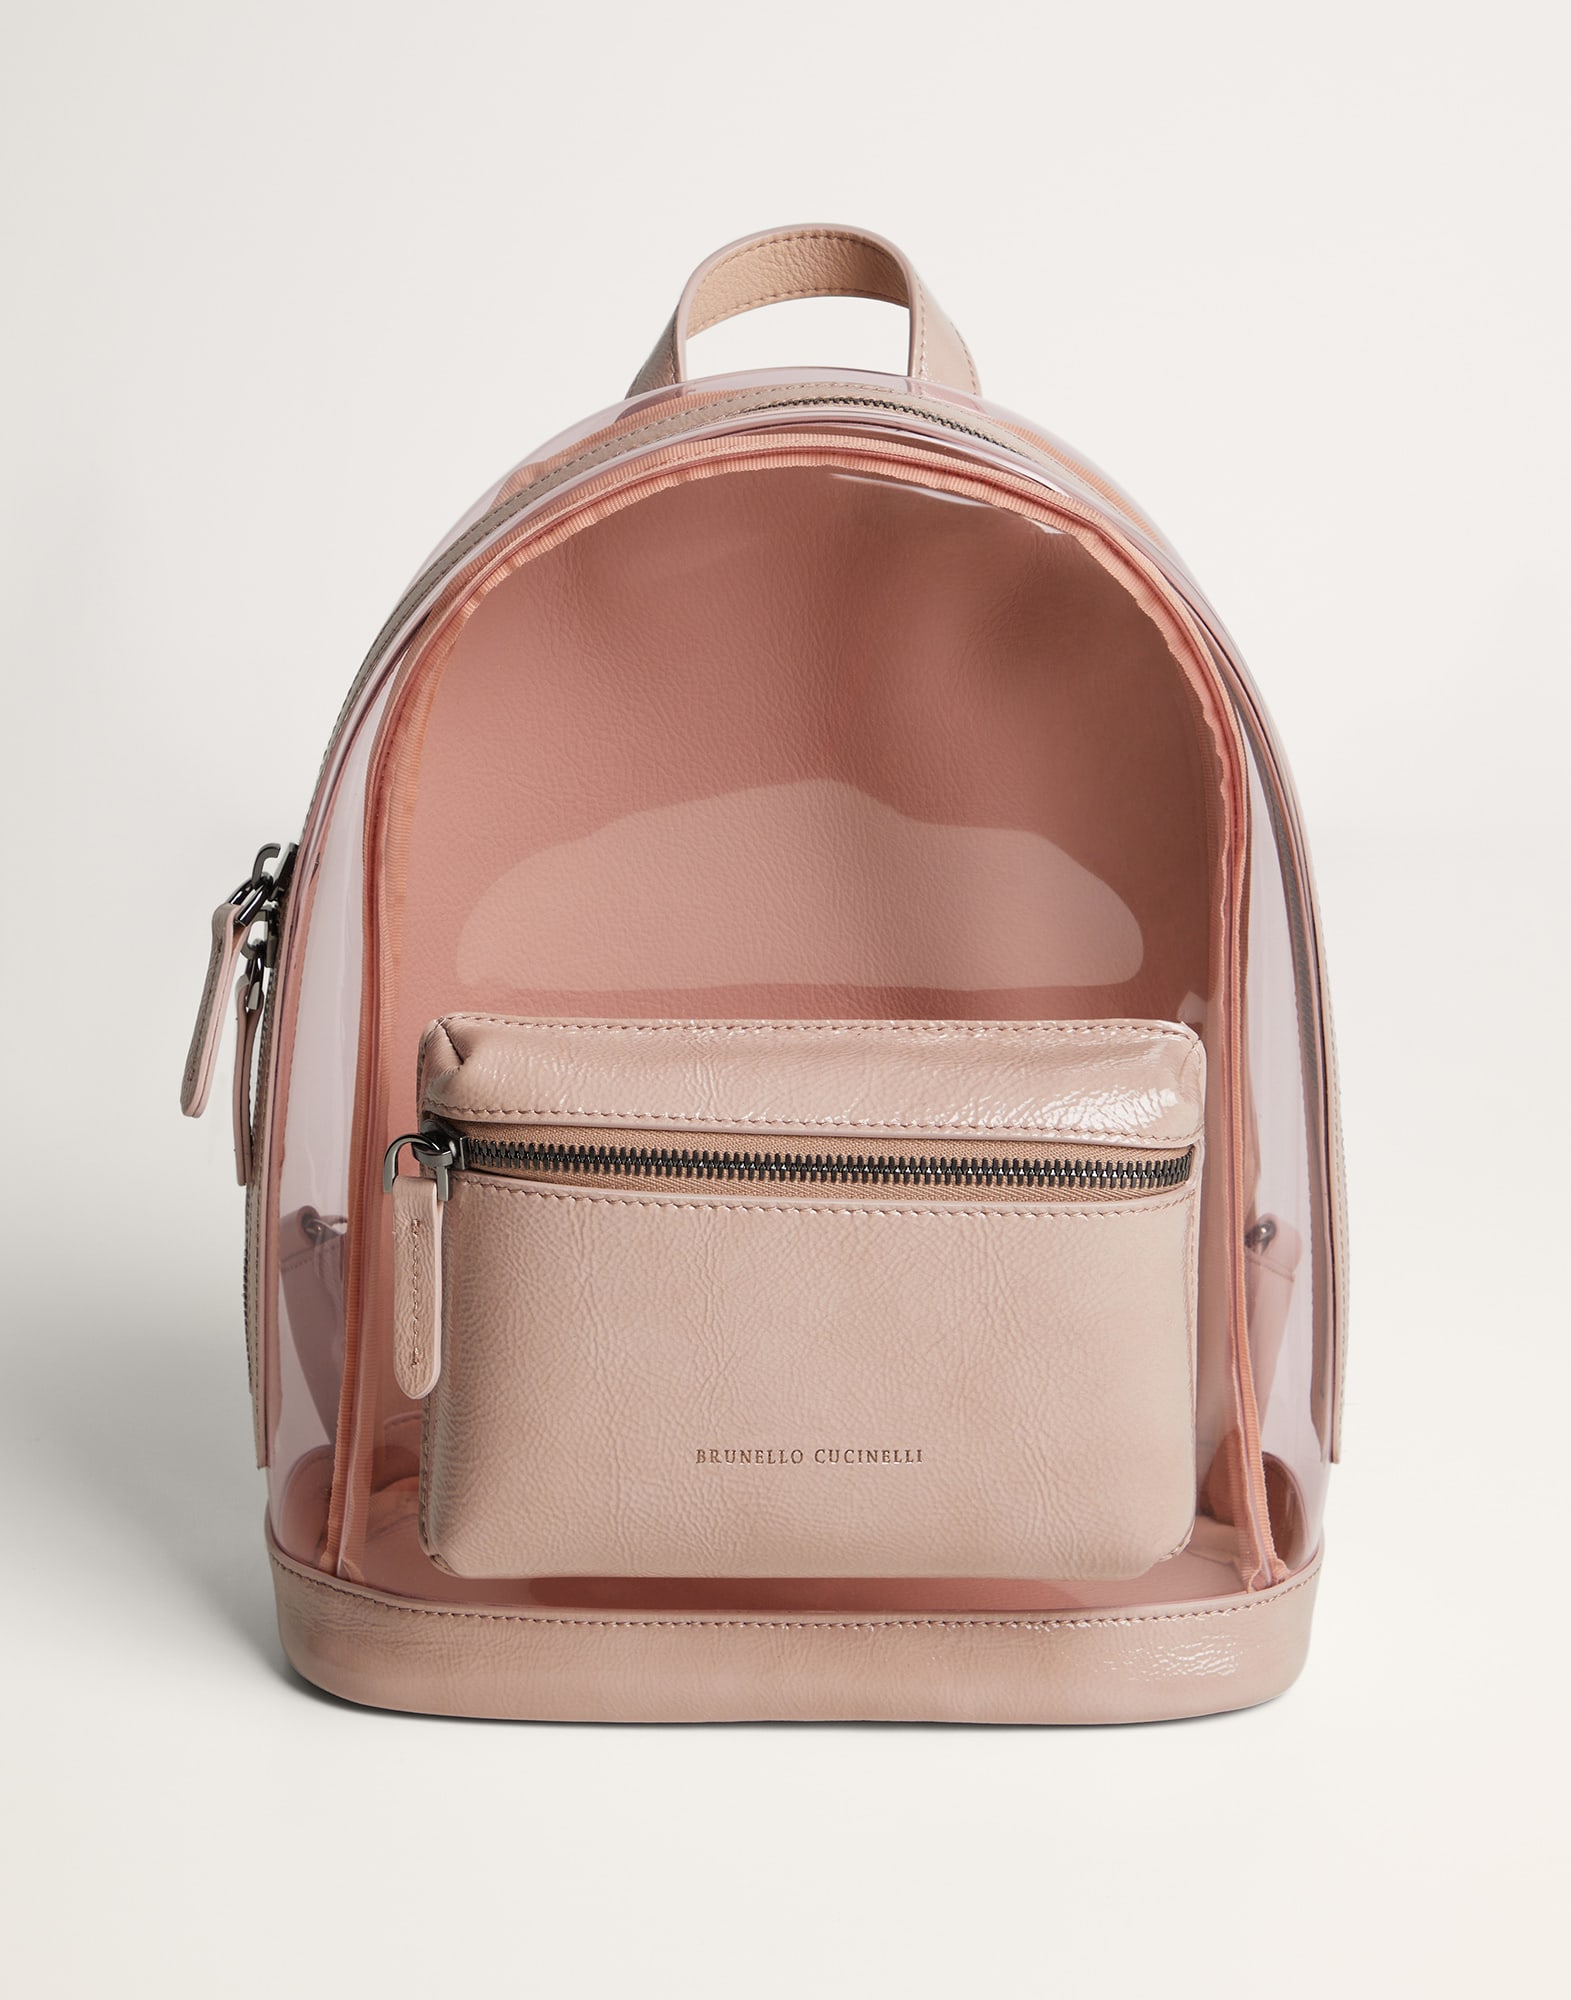 Buy Forever 21 Kendall + Kylie Silver Metallic Canvas Backpack online